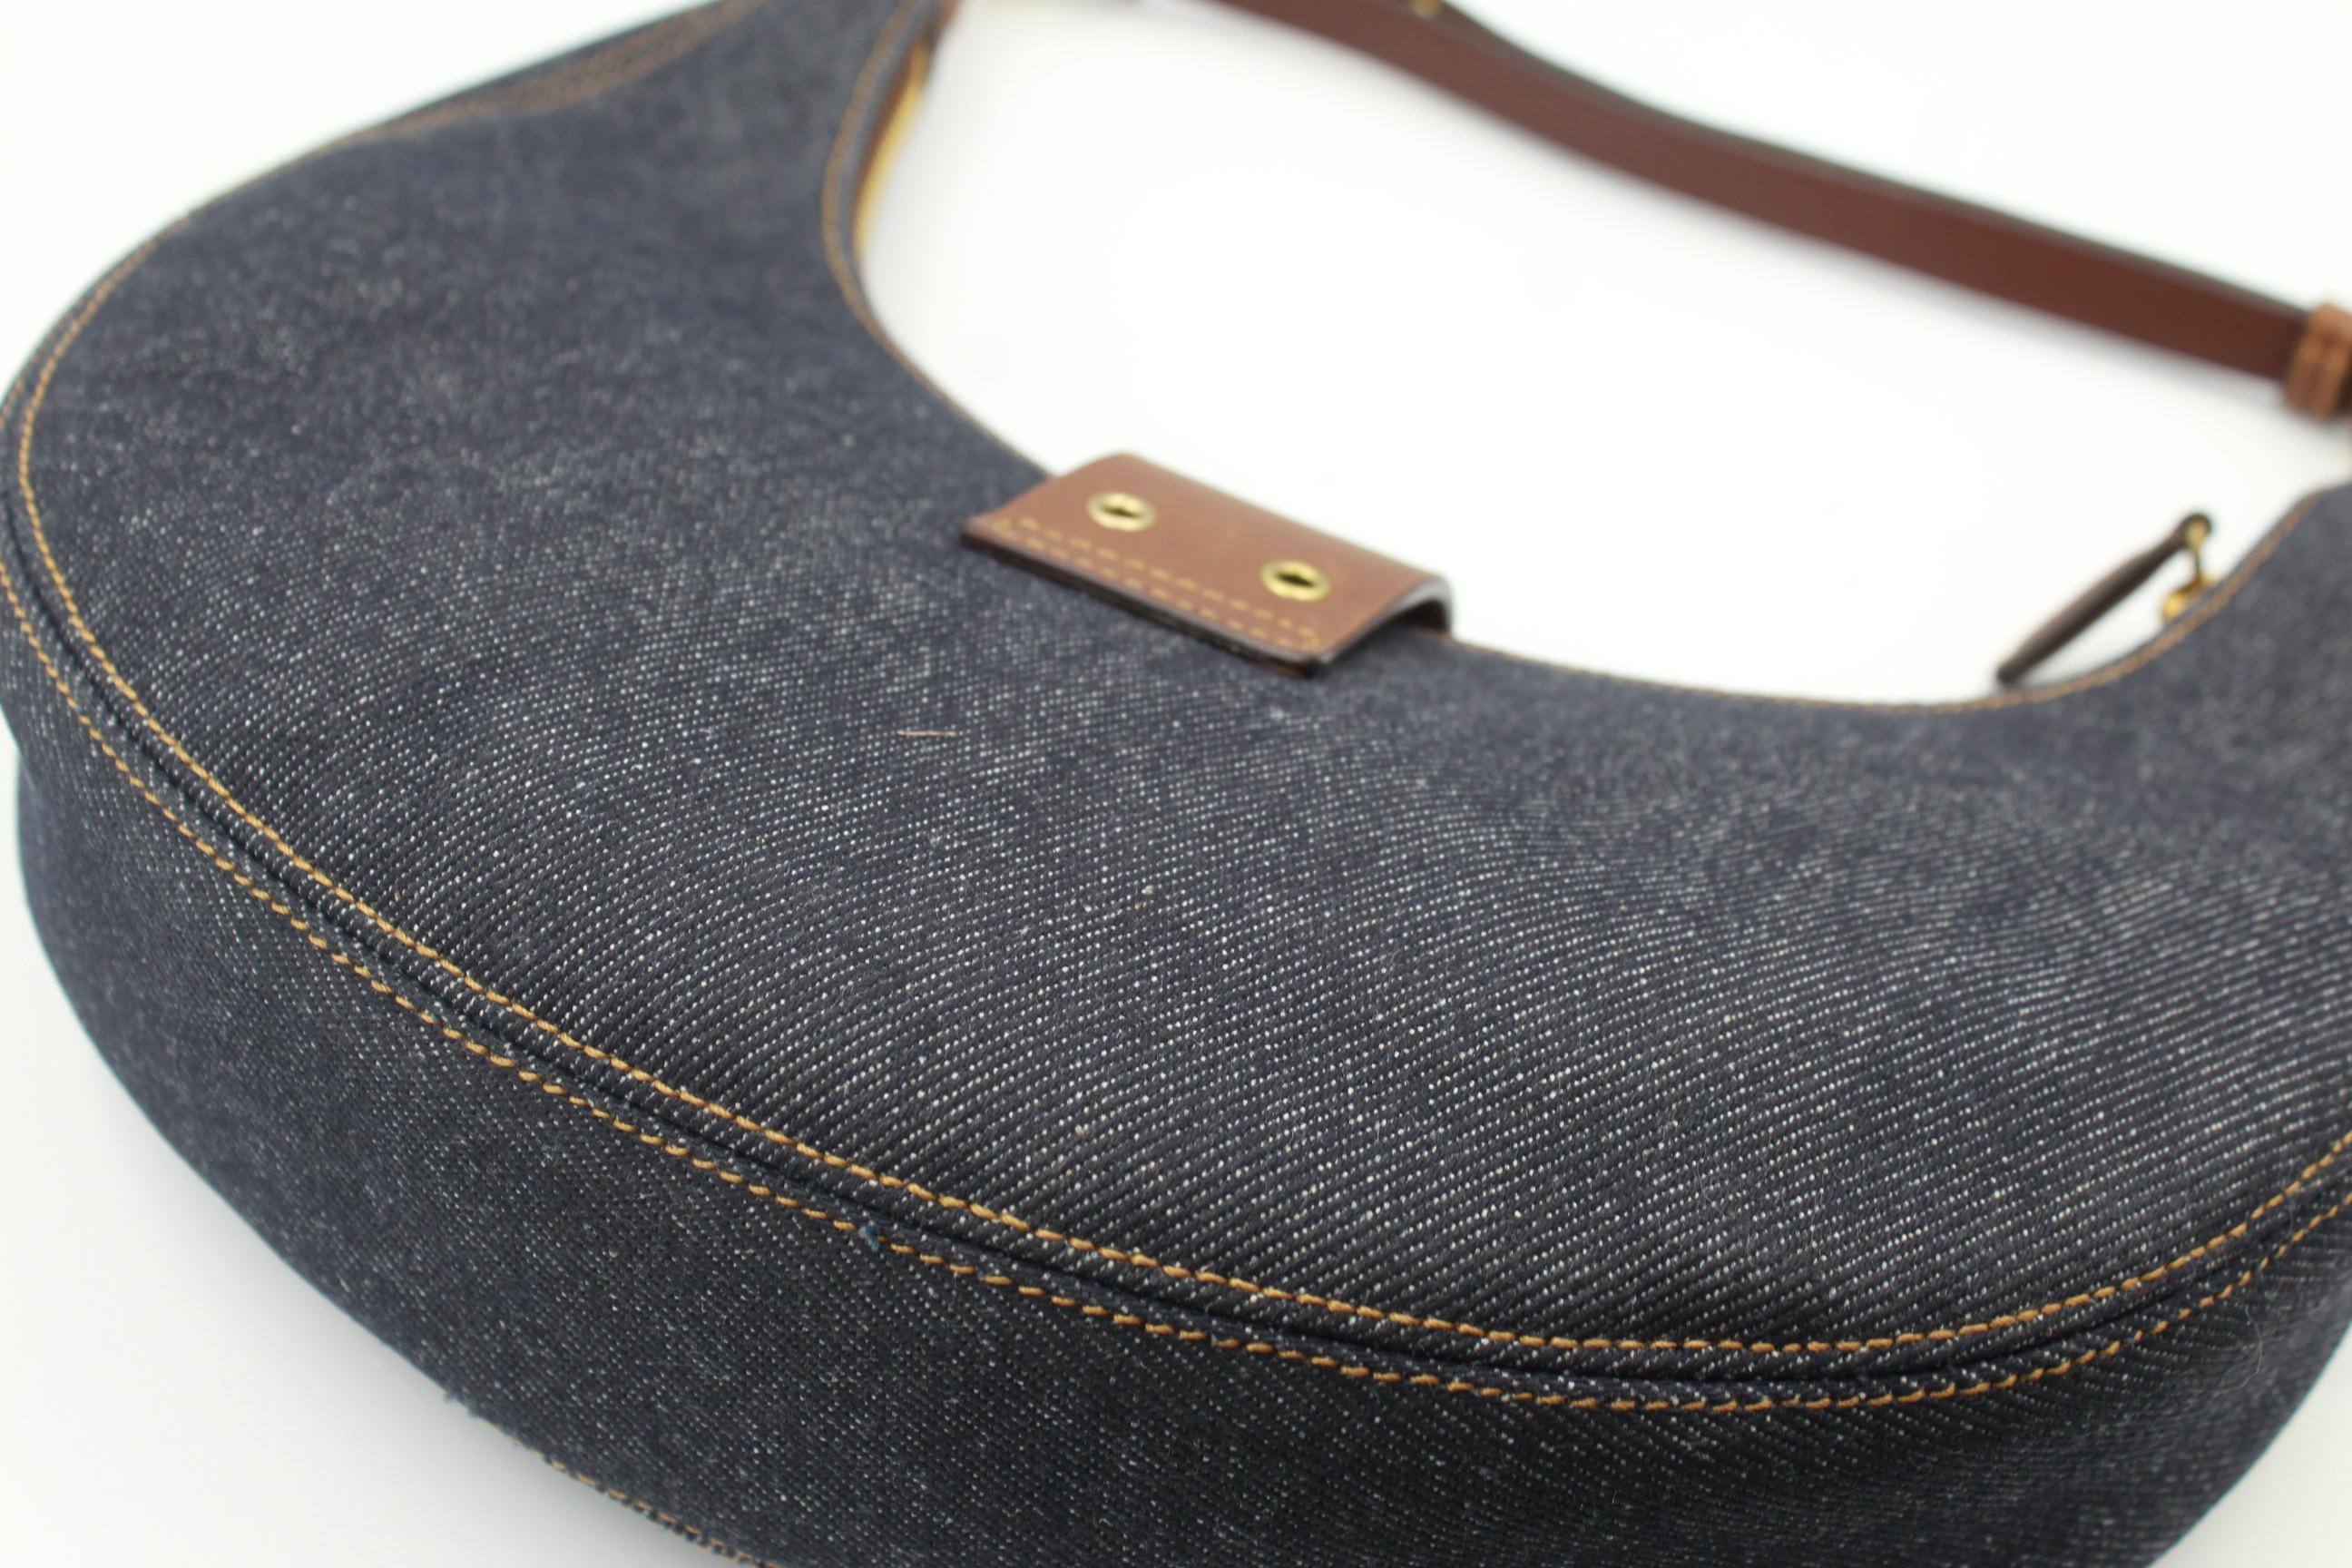 Super nice Christian Dior by Johan Galliano Handbag in Denim Canvas and Brown Leather.
Really good condiiton
Size 26x22